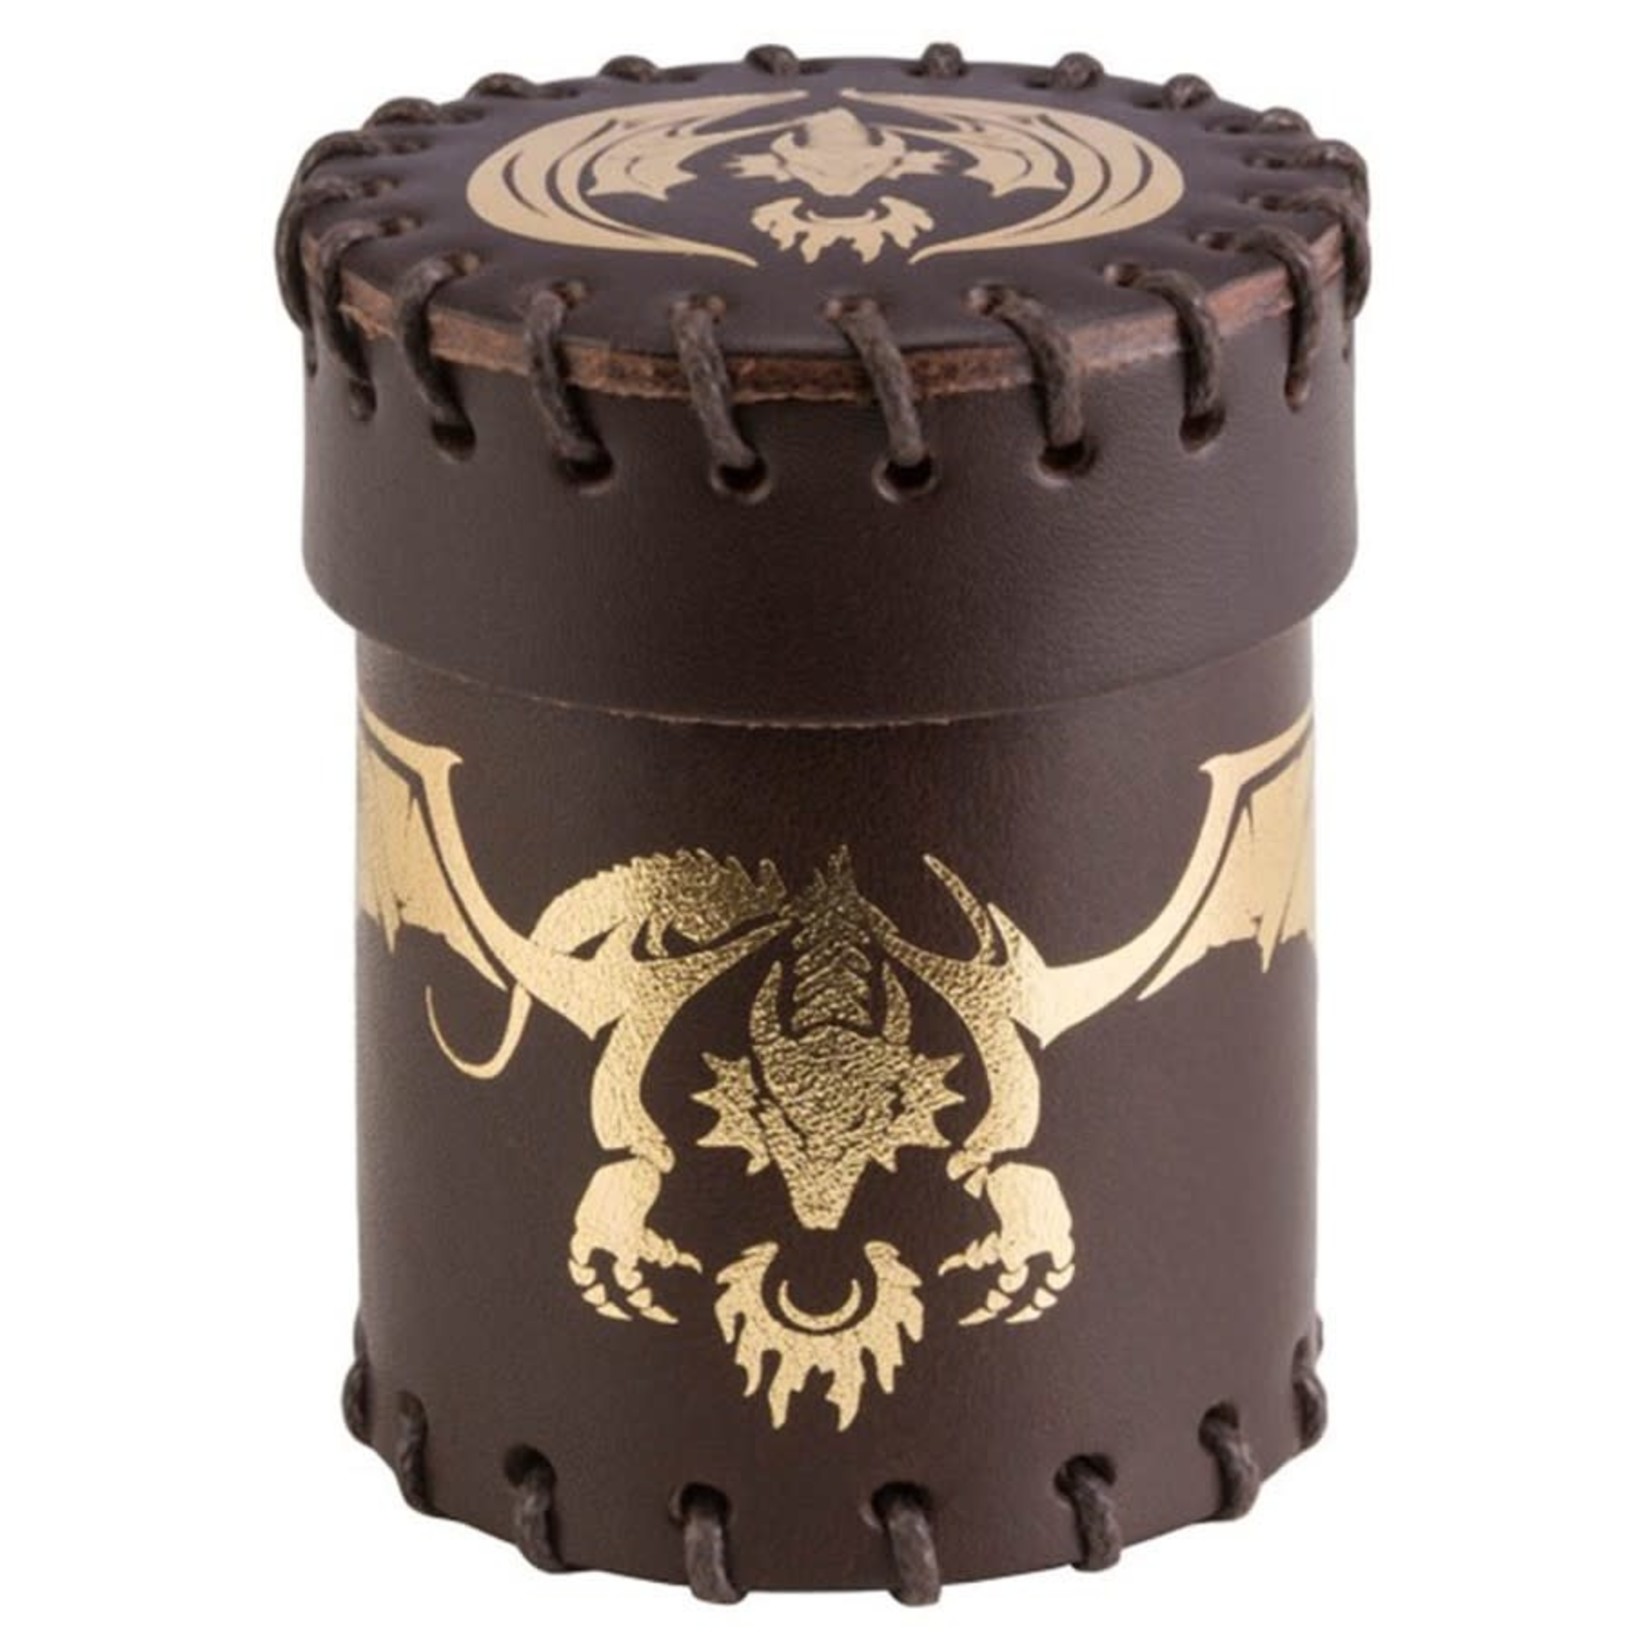 Dice Cup: Flying Dragon Leather Brown & Gold